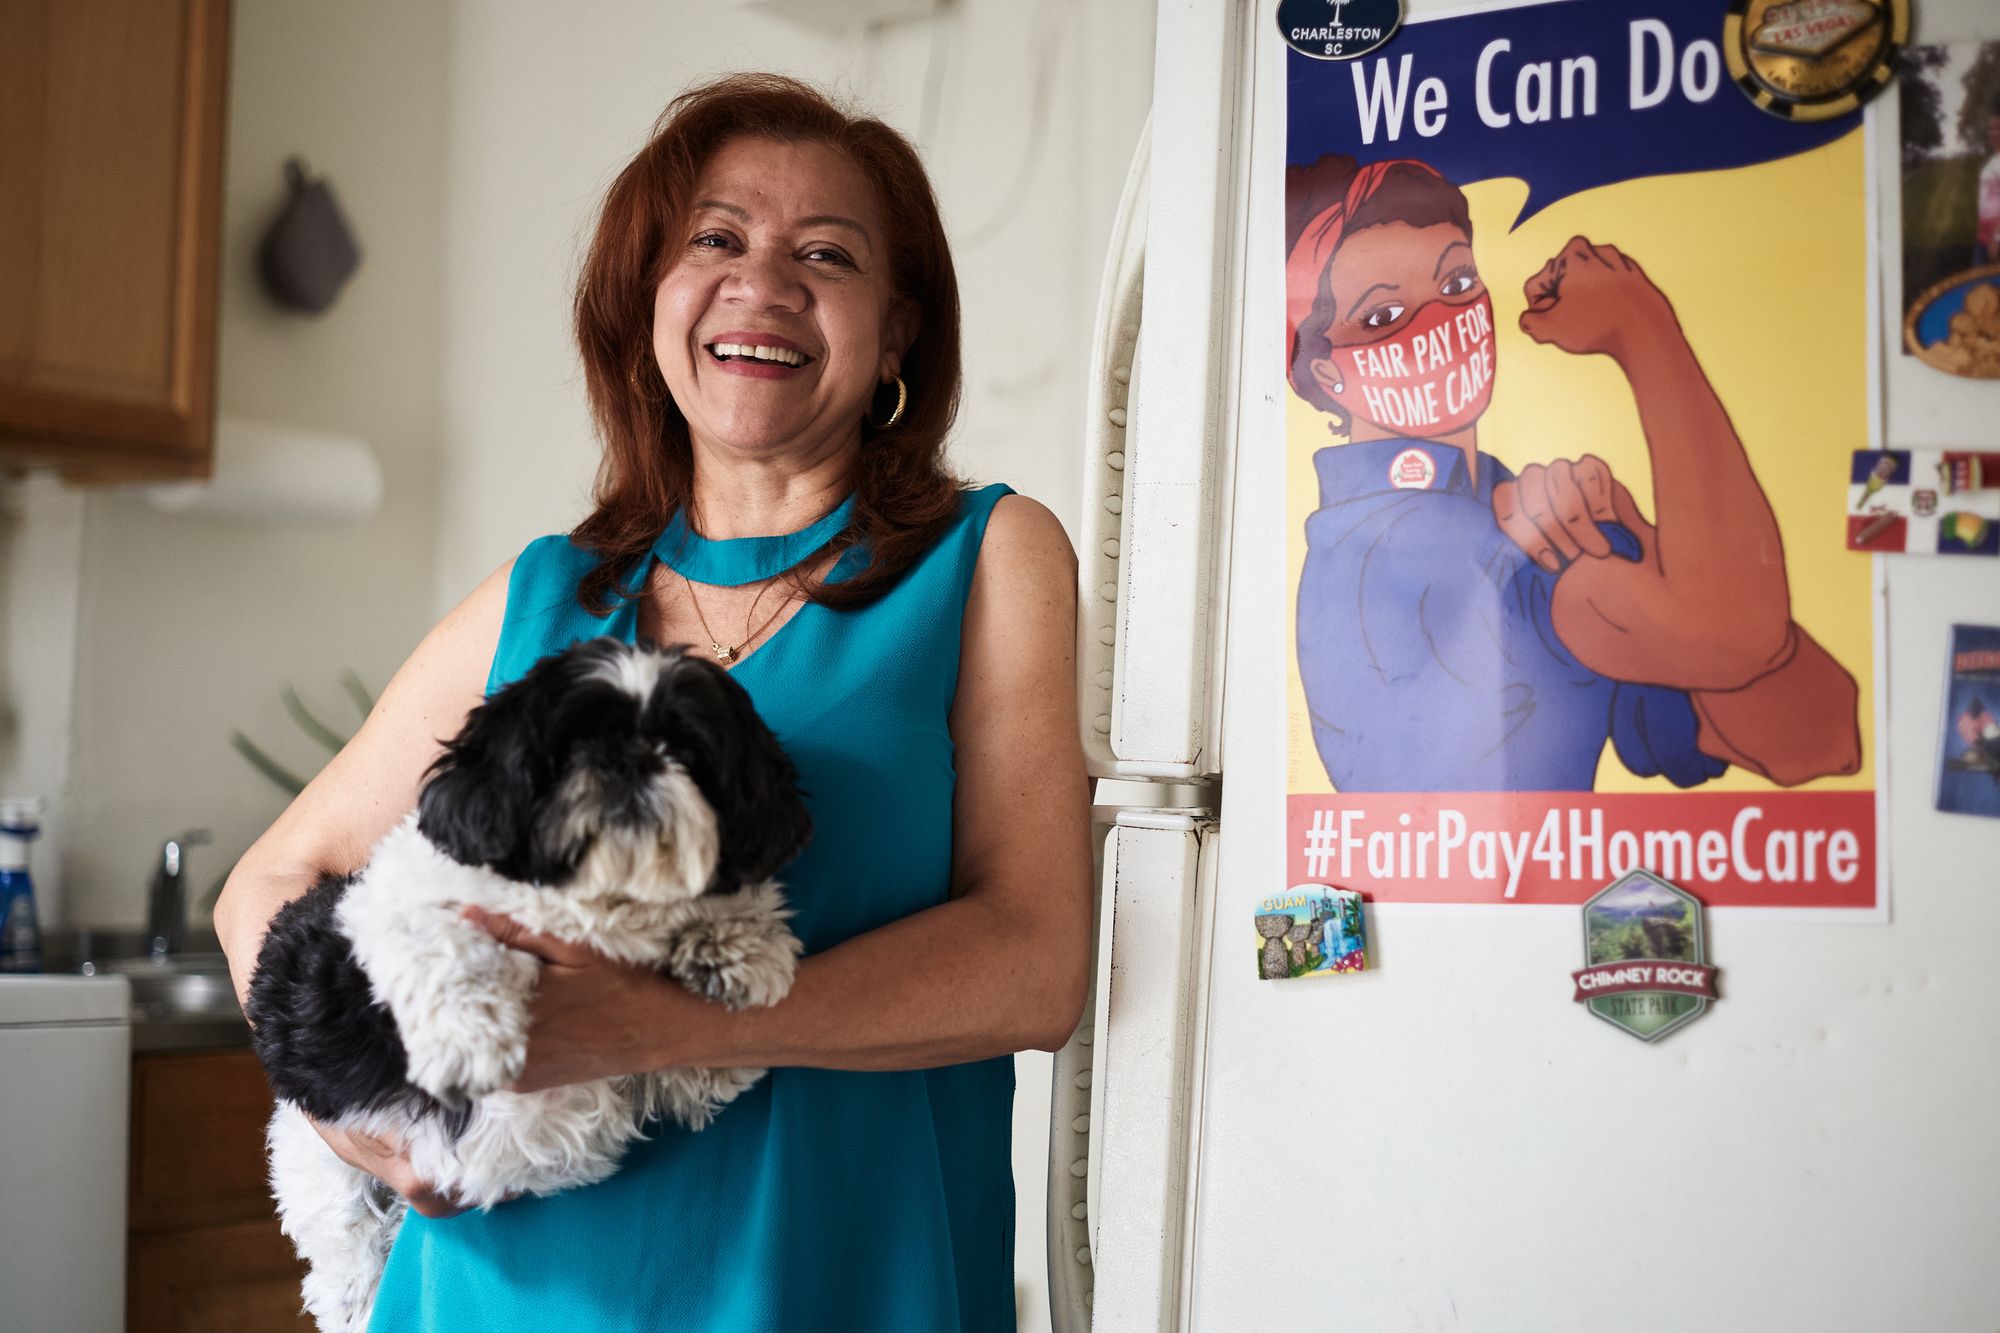 Calvo standing in her apartment in front of a fridge with a "#FairPay4HomeCare" sign while holding her dog.